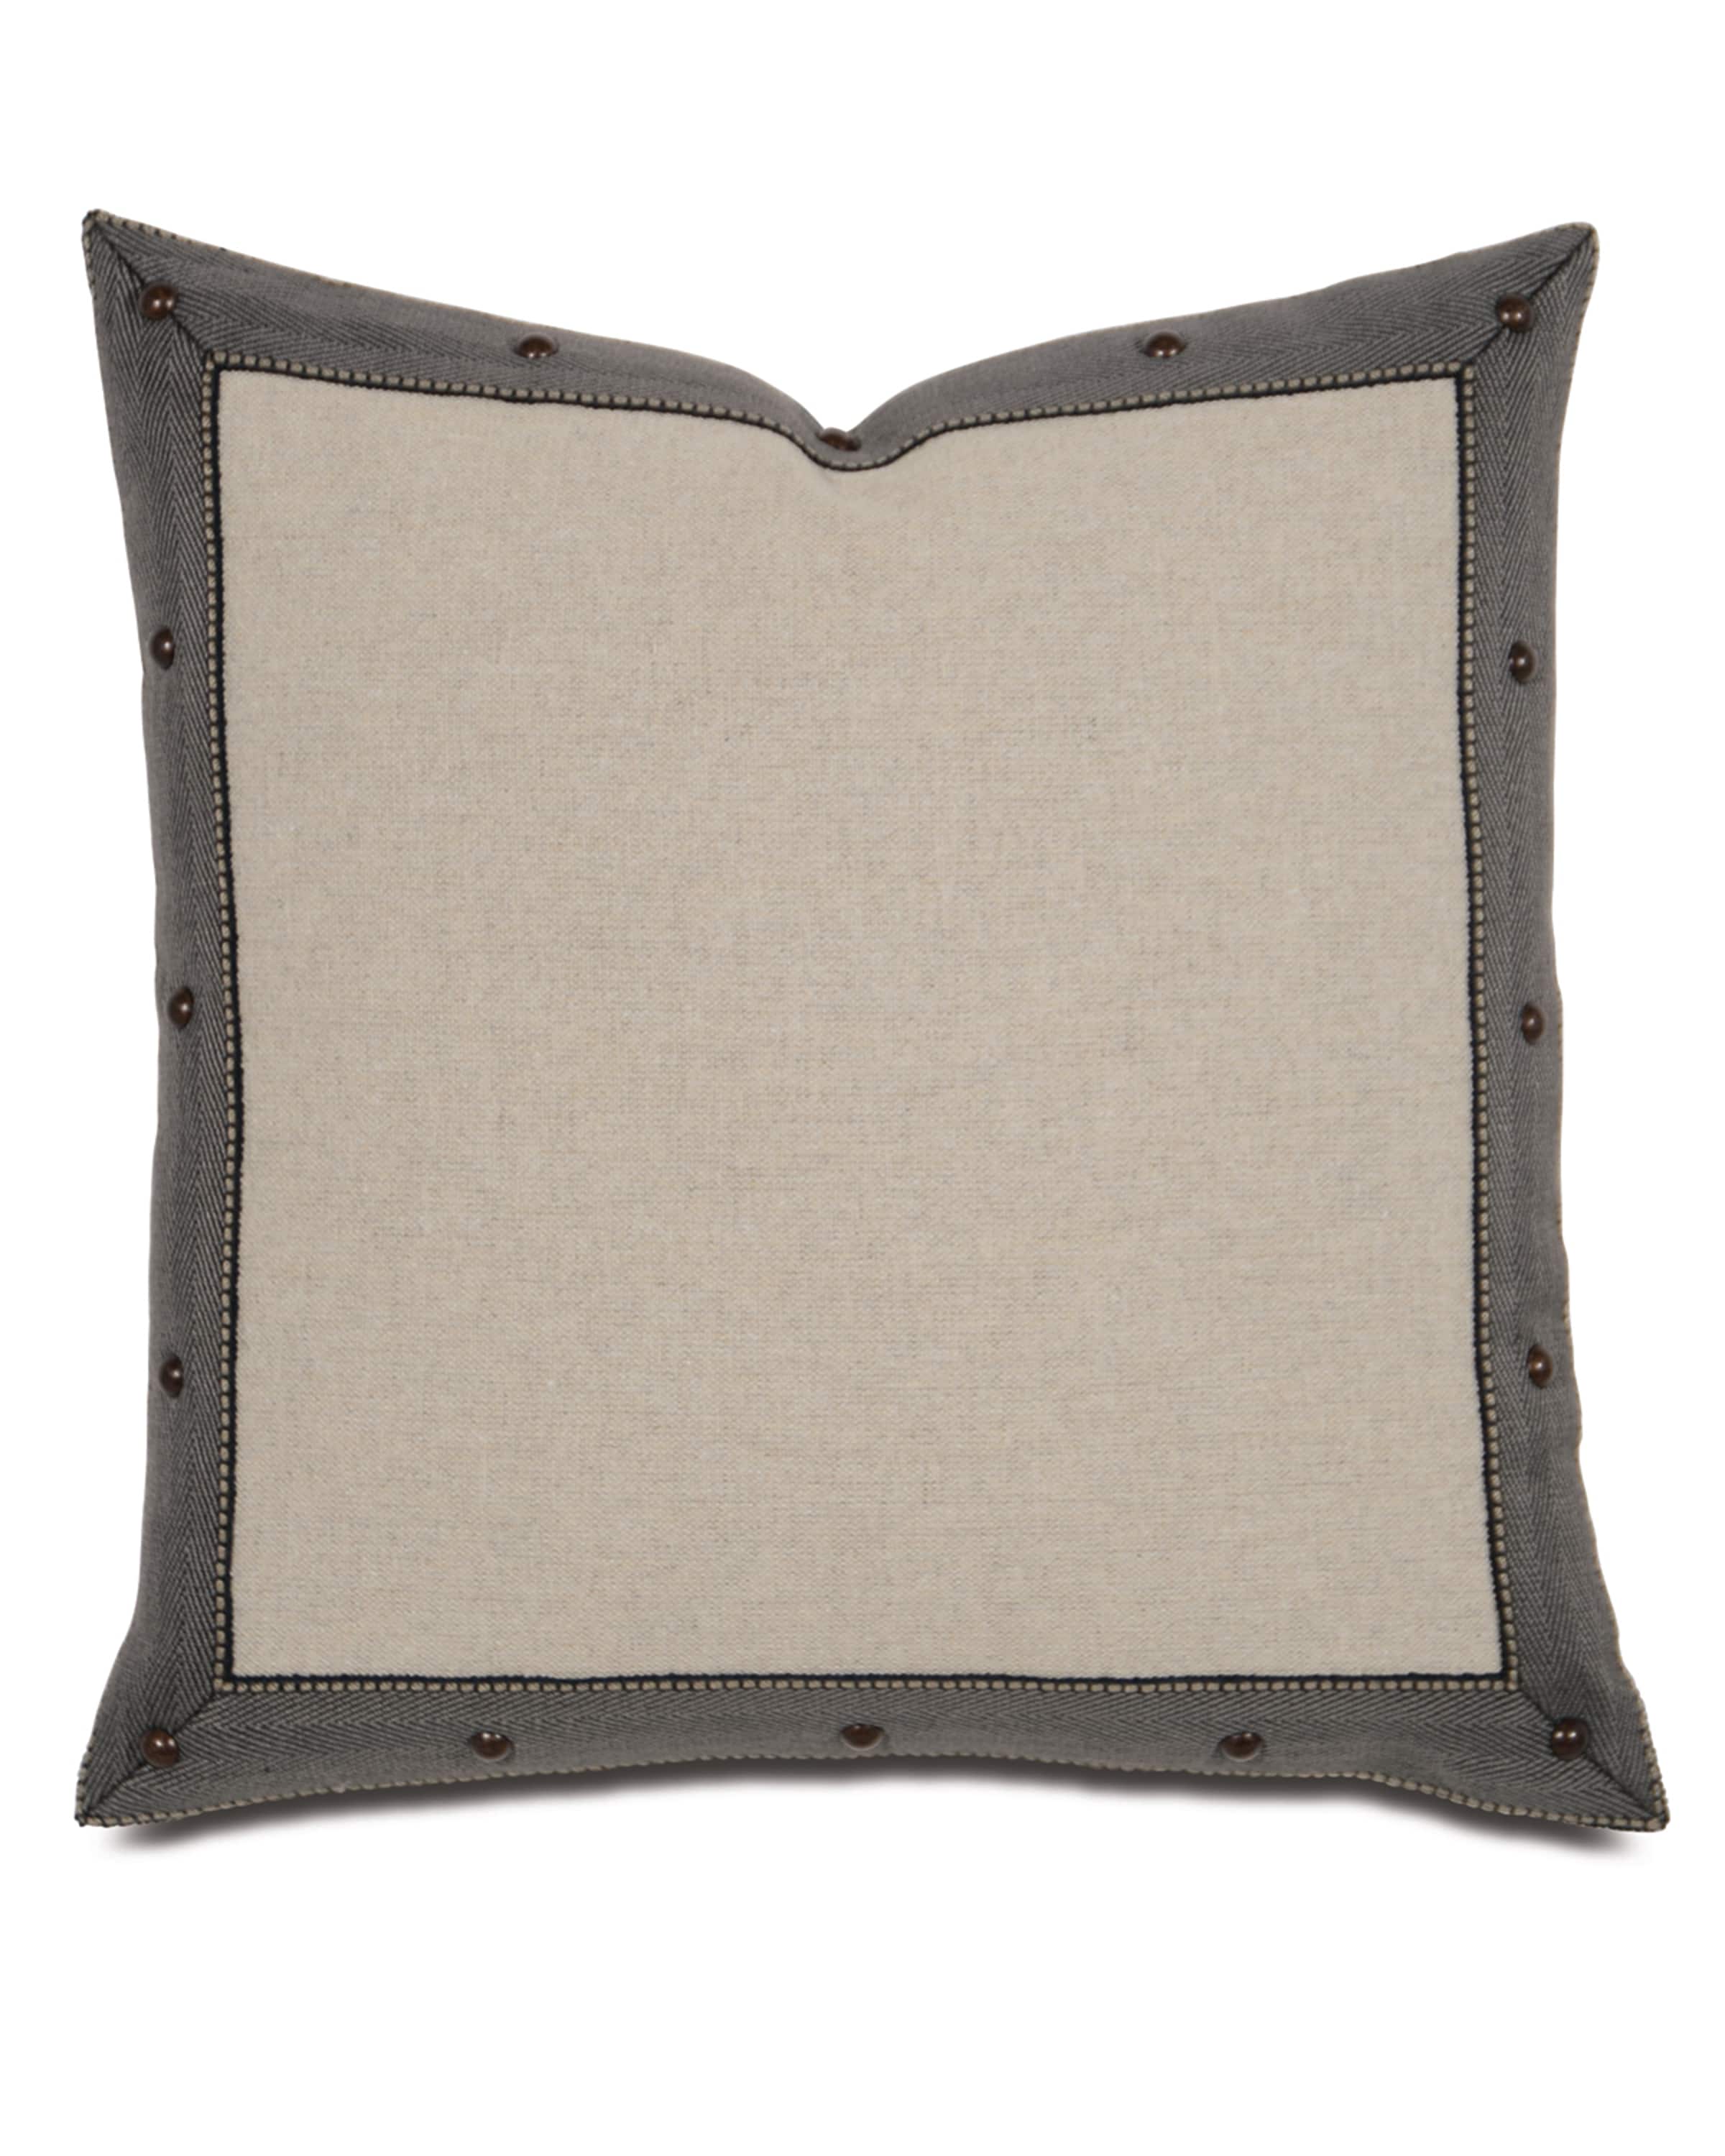 Eastern Accents Telluride Decorative Pillow